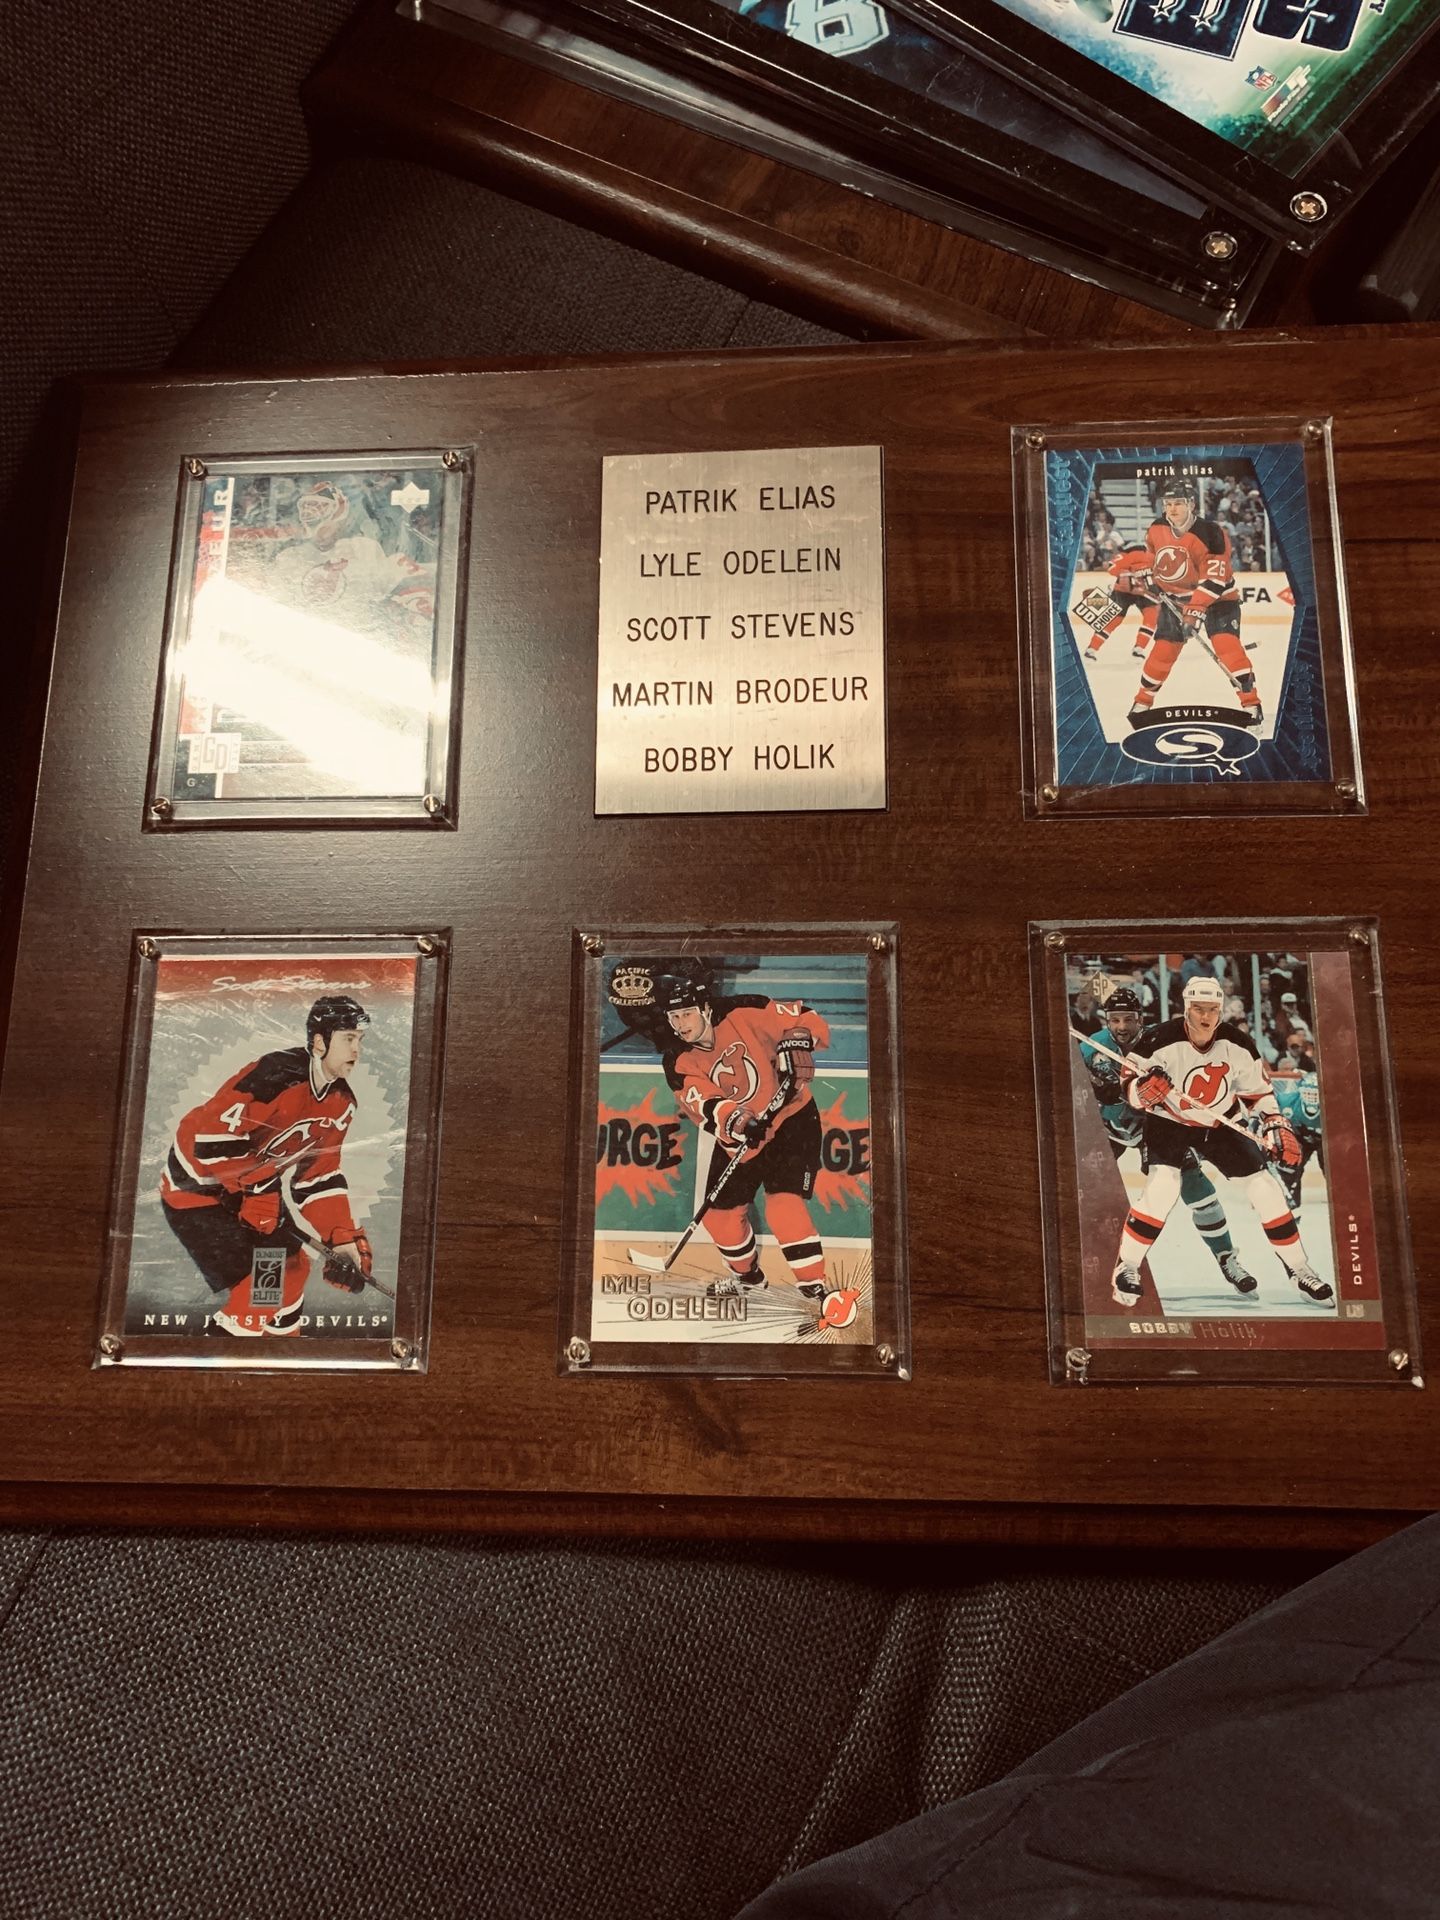 DEVIL PLAYERS CARD COLLECTIBLES.